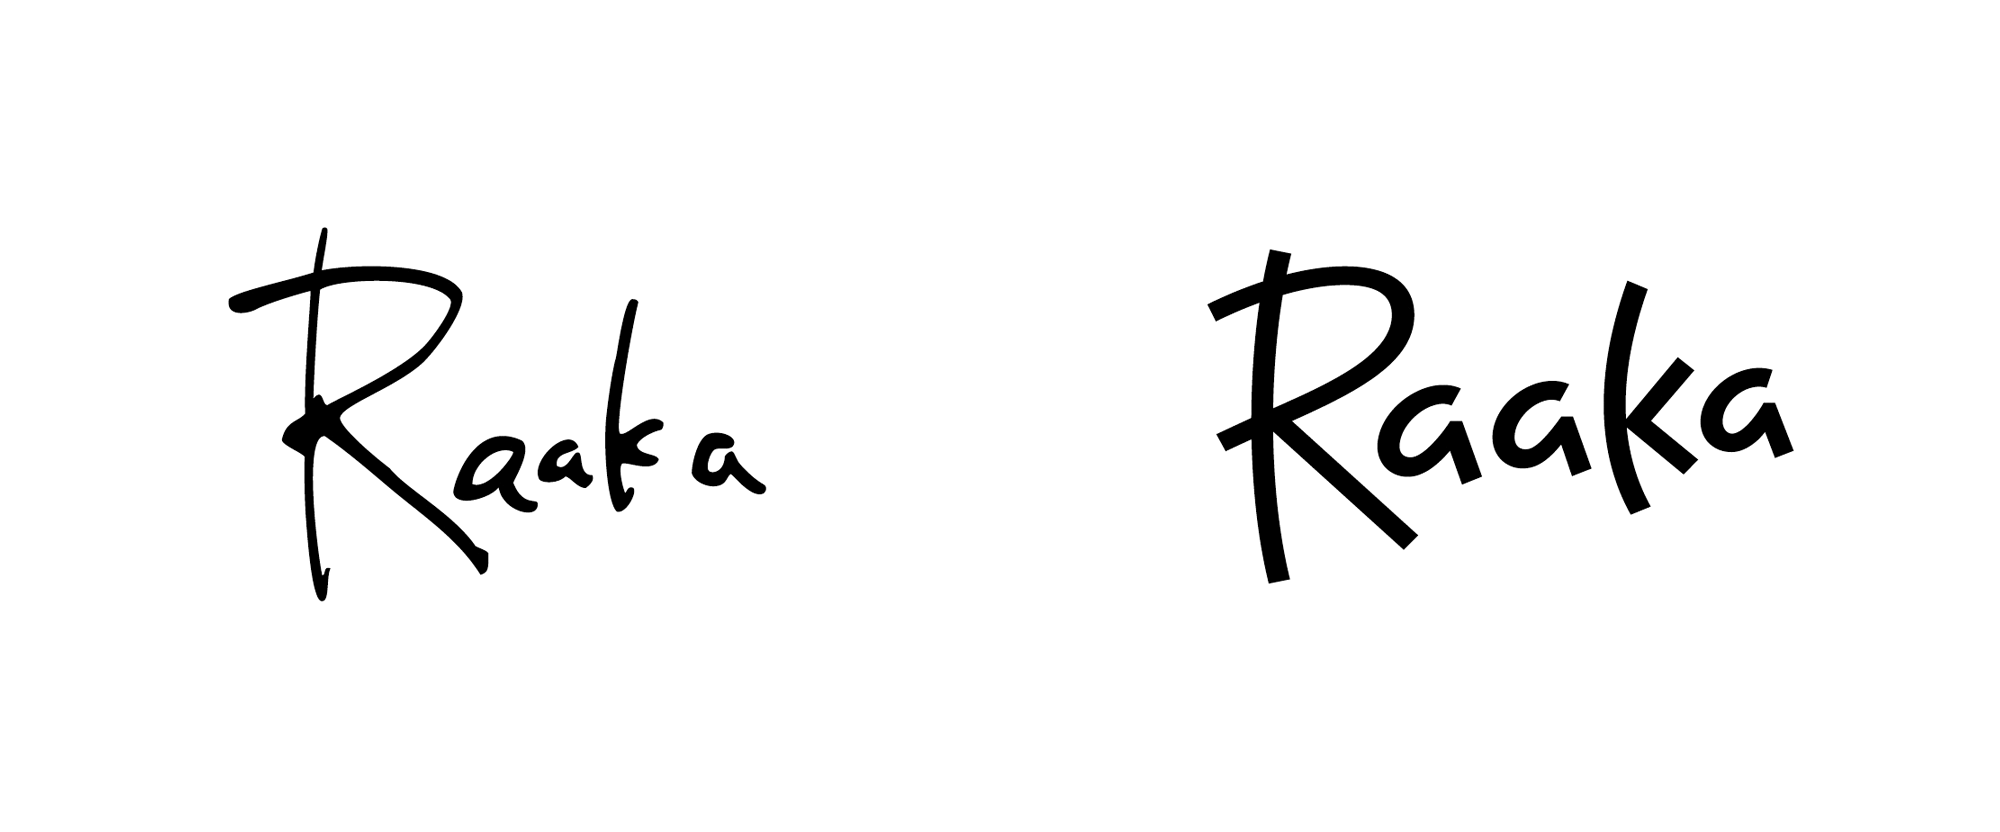 Andrea Logo - Brand New: New Logo and Packaging for Raaka